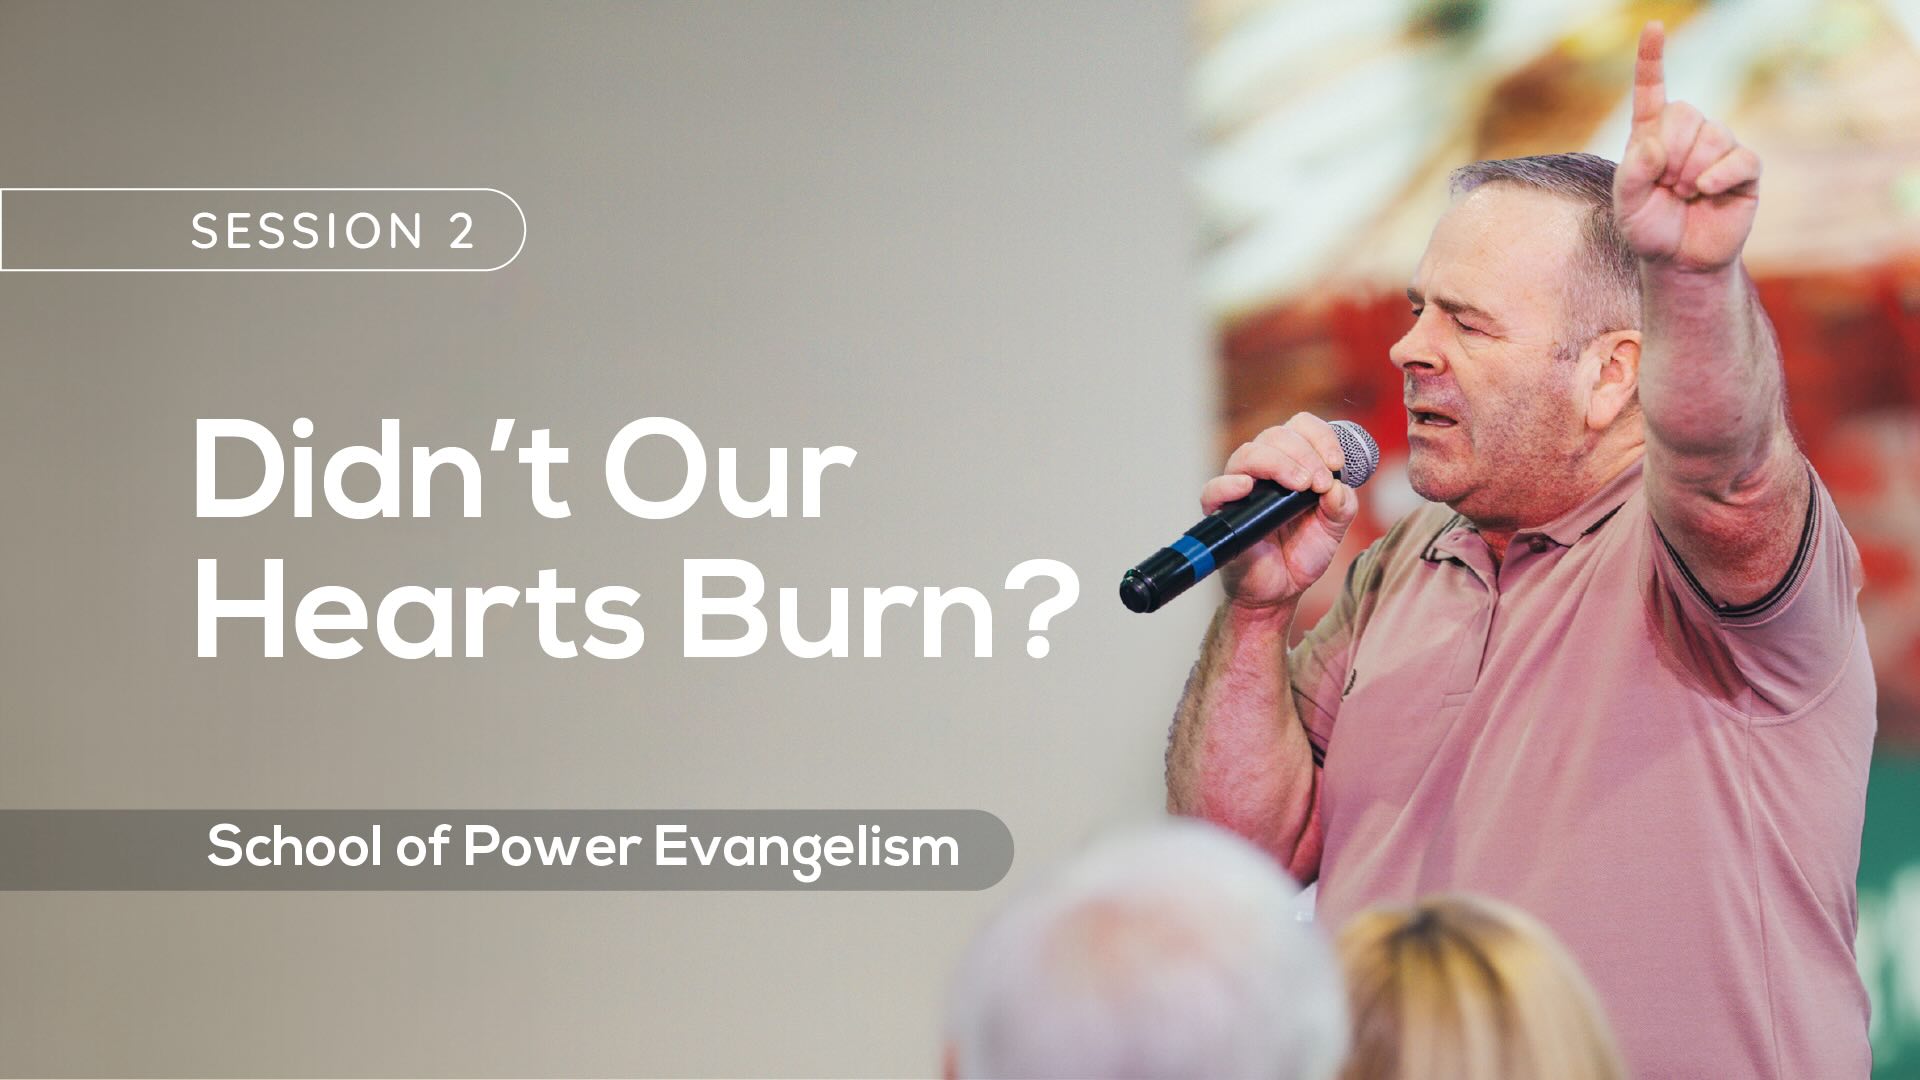 Image for 'Didn't Our Hearts Burn?' about the power of the Gospel message